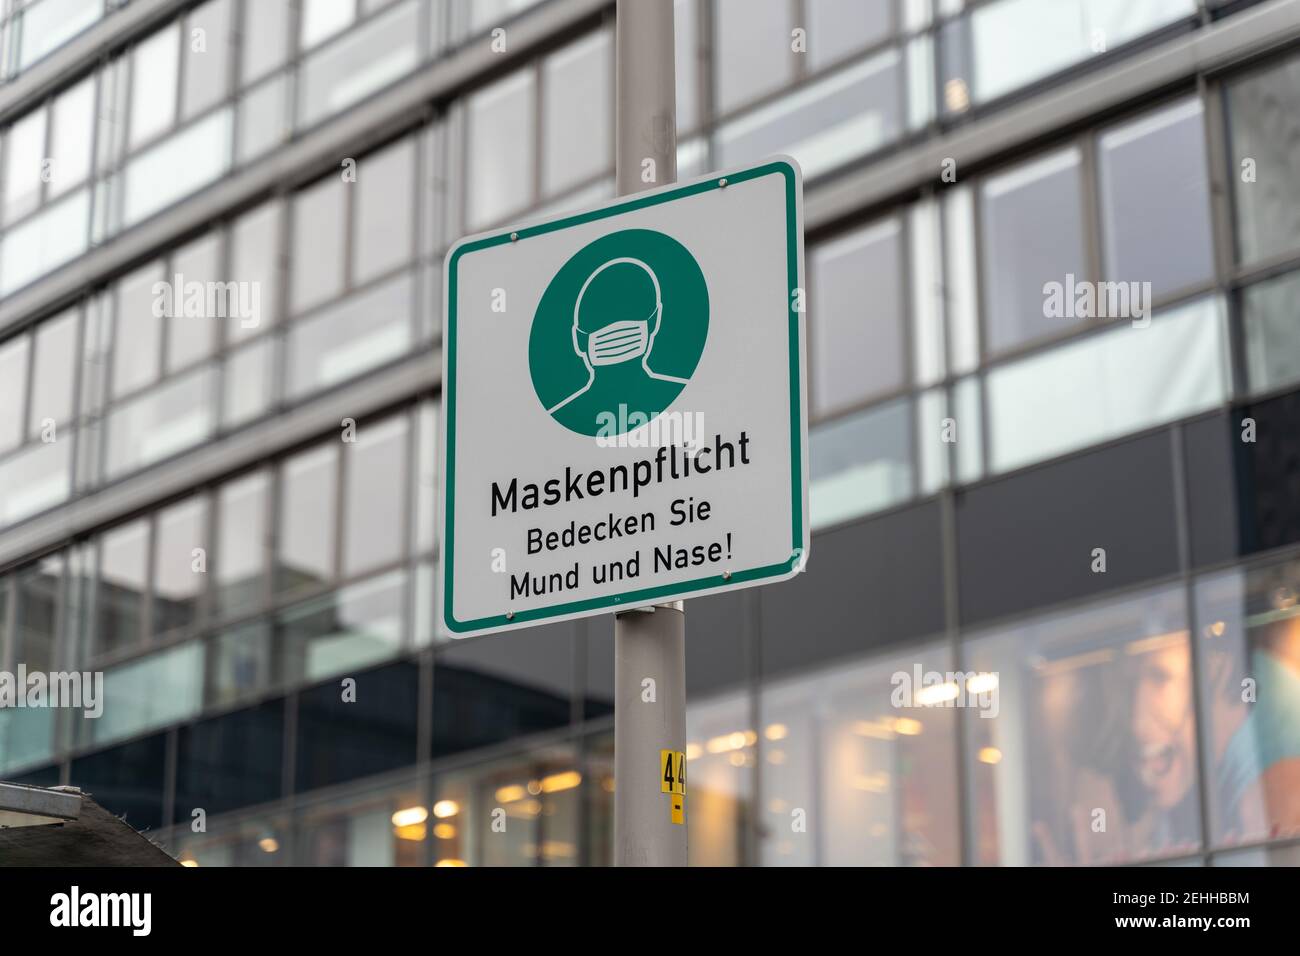 'Maskenpflicht' sign in the city on Prager Strasse due to Covid measures to wear a coronavirus face mask in Dresden, Germany. Stock Photo